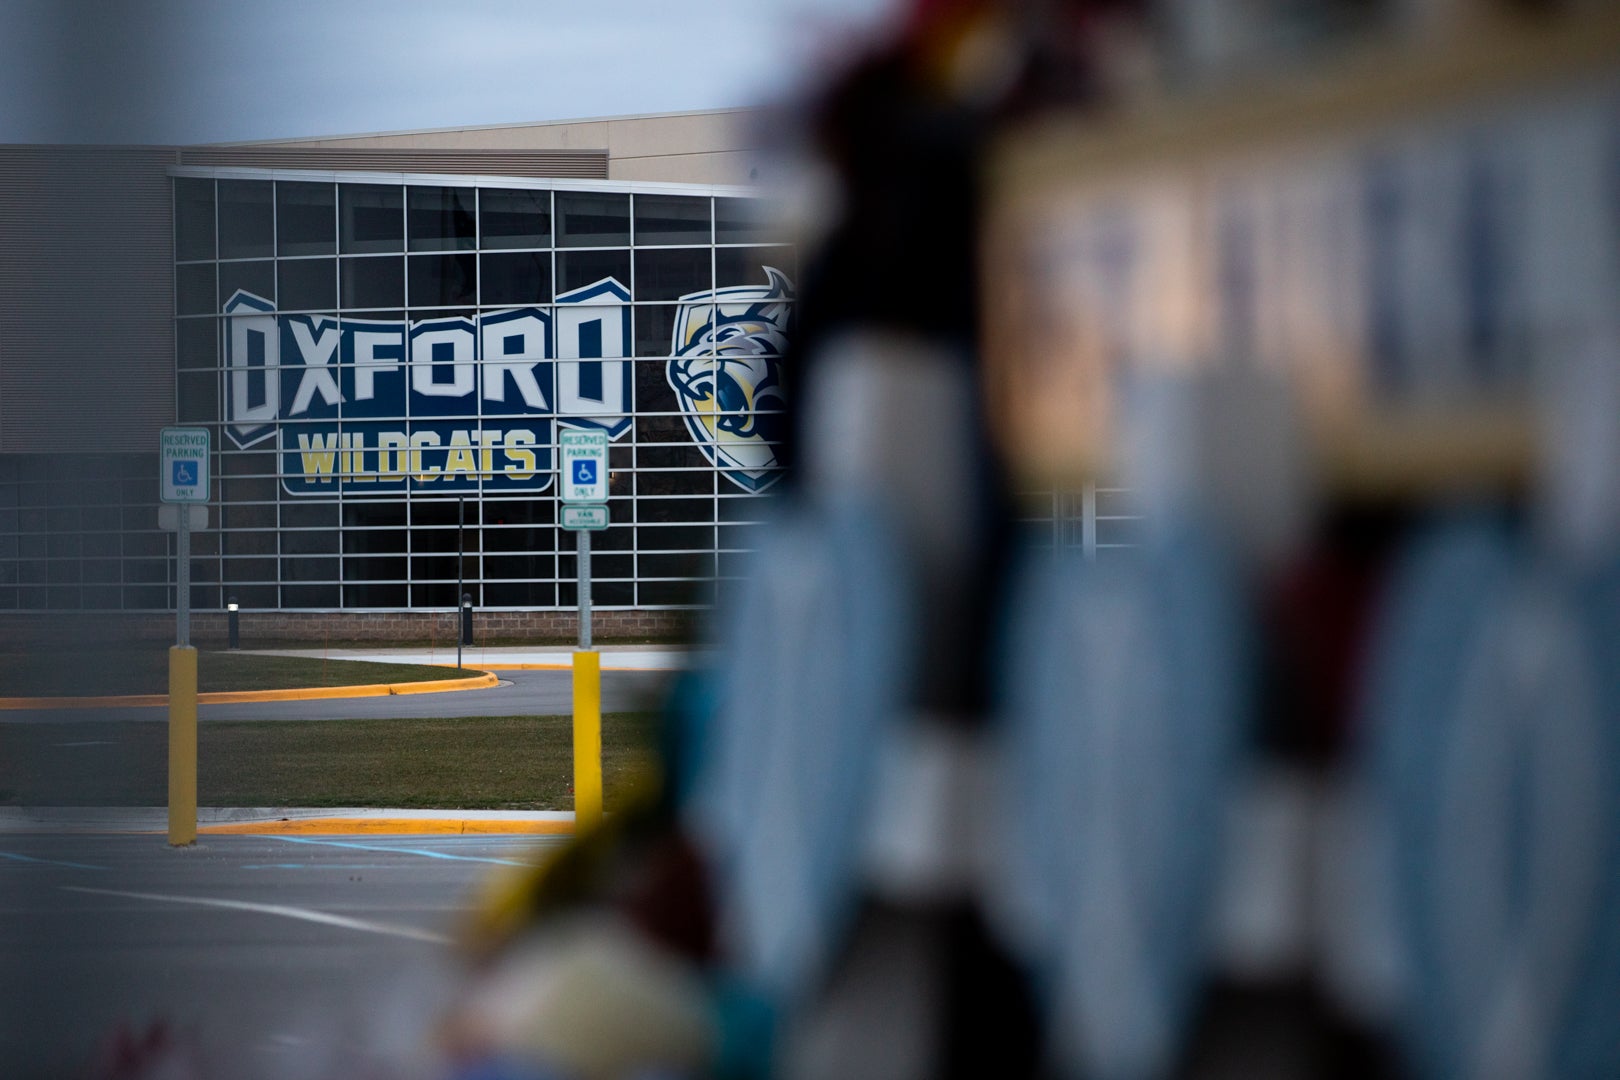 Oxford High School was the scene of America’s worst school shooting since 2018